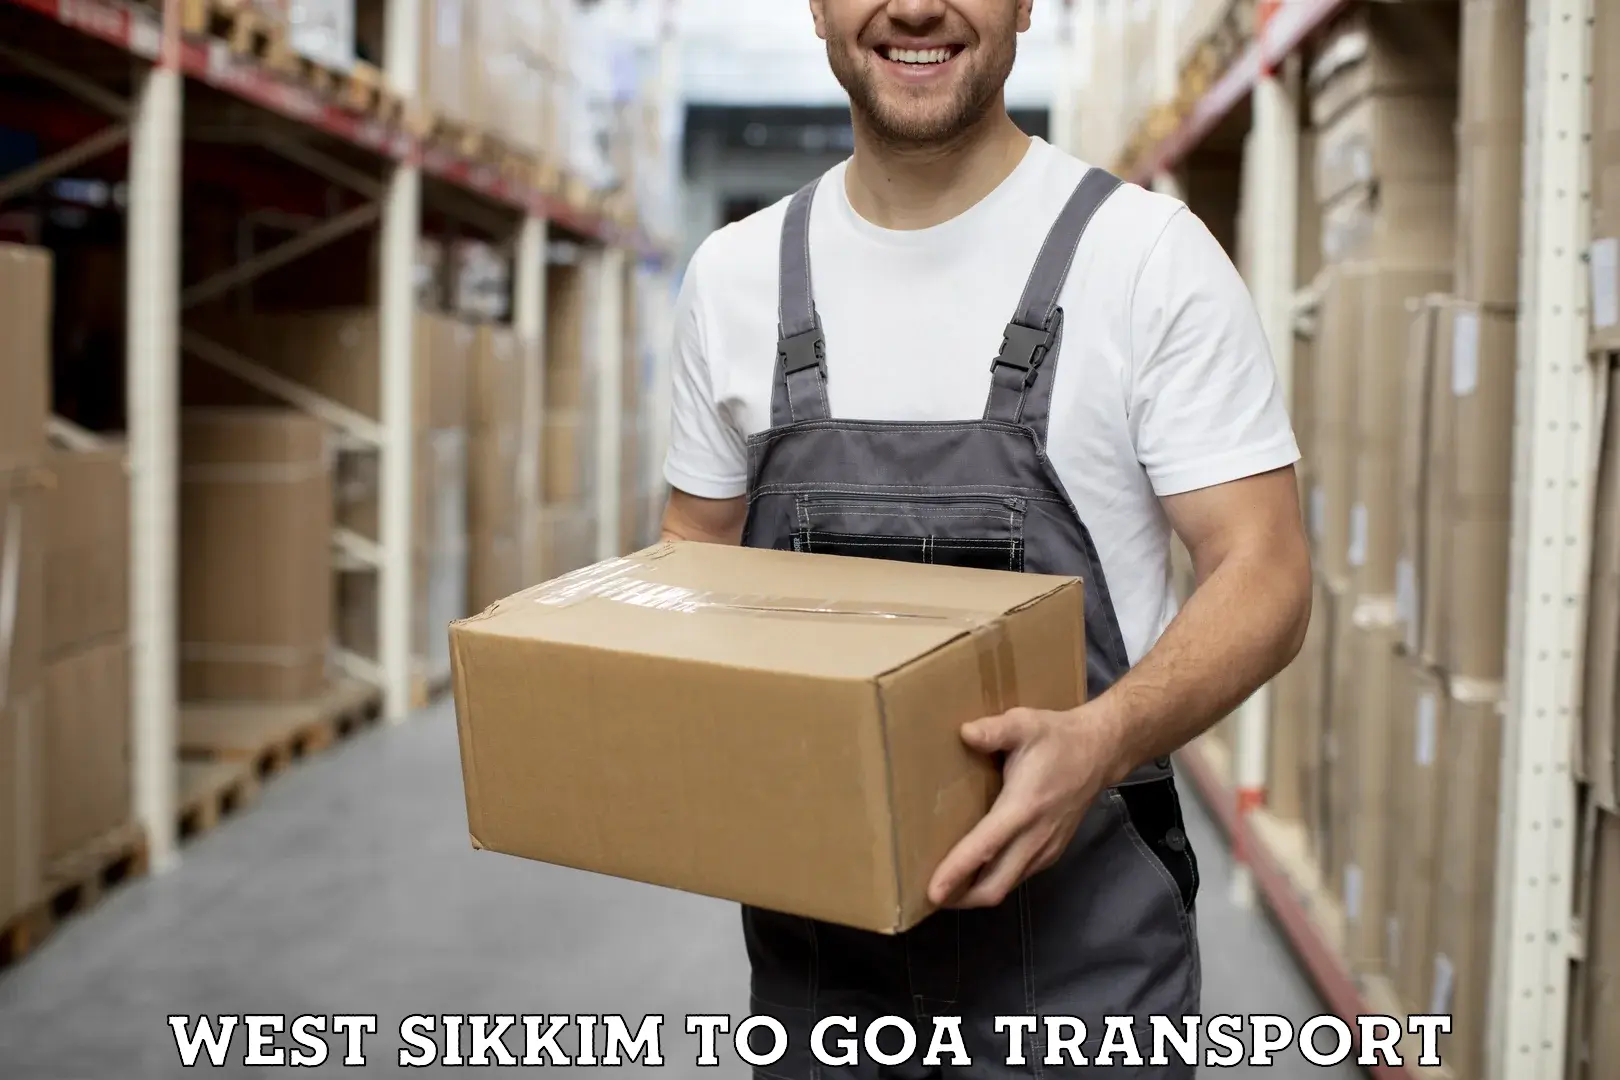 Furniture transport service West Sikkim to South Goa